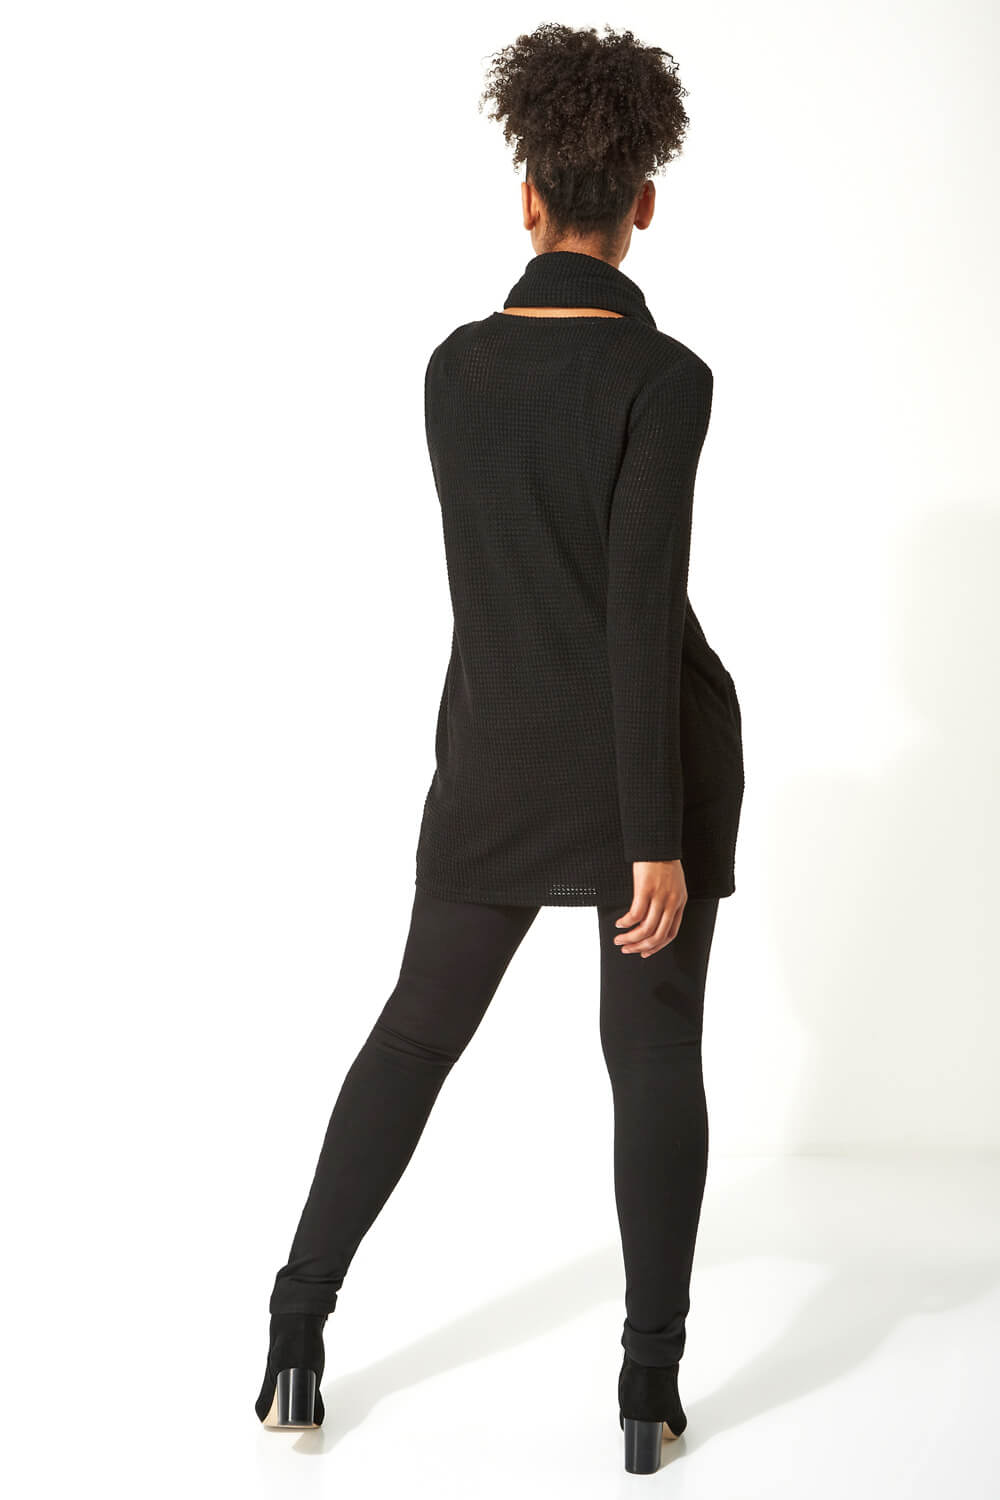 Black Textured Longline Top with Snood, Image 3 of 6